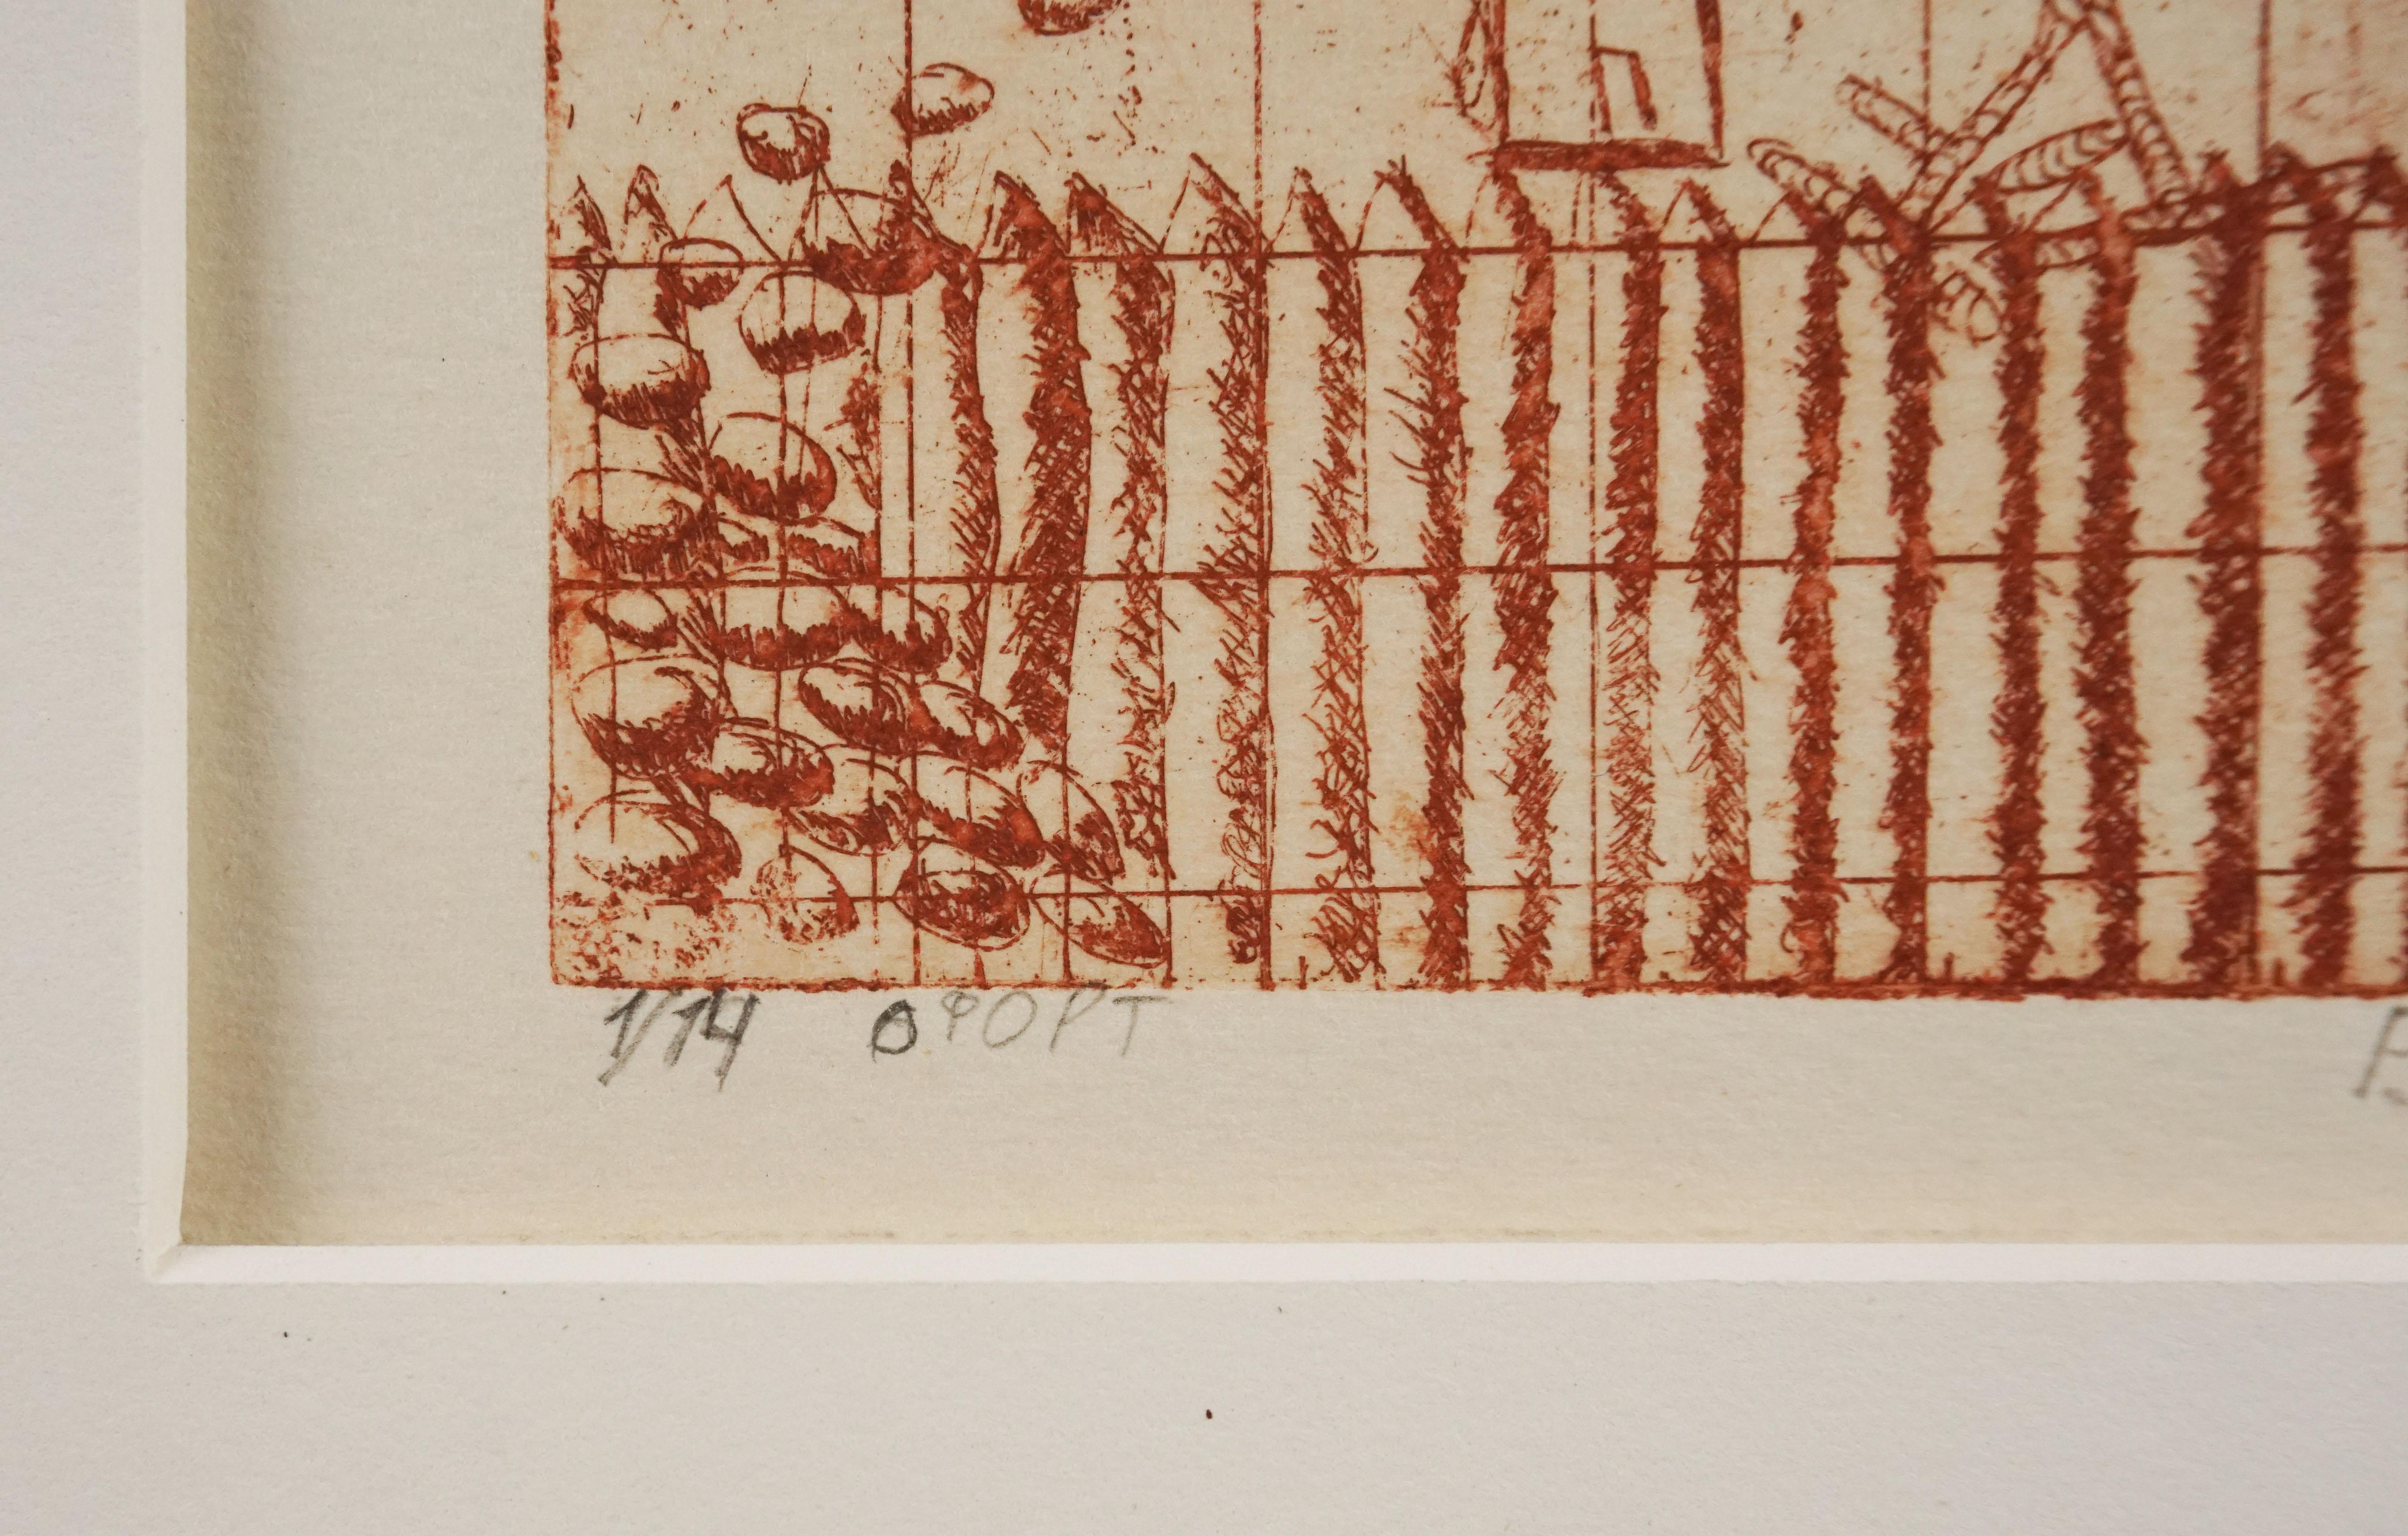 An abstract expressionist miniature etching on paper depicting a bird on a fence, with abstract expressionist animals floating in the sky by R. Silvestrov (Russian, 20th Century). Signed and titled in Russian, lower left. Presented in a white mat.